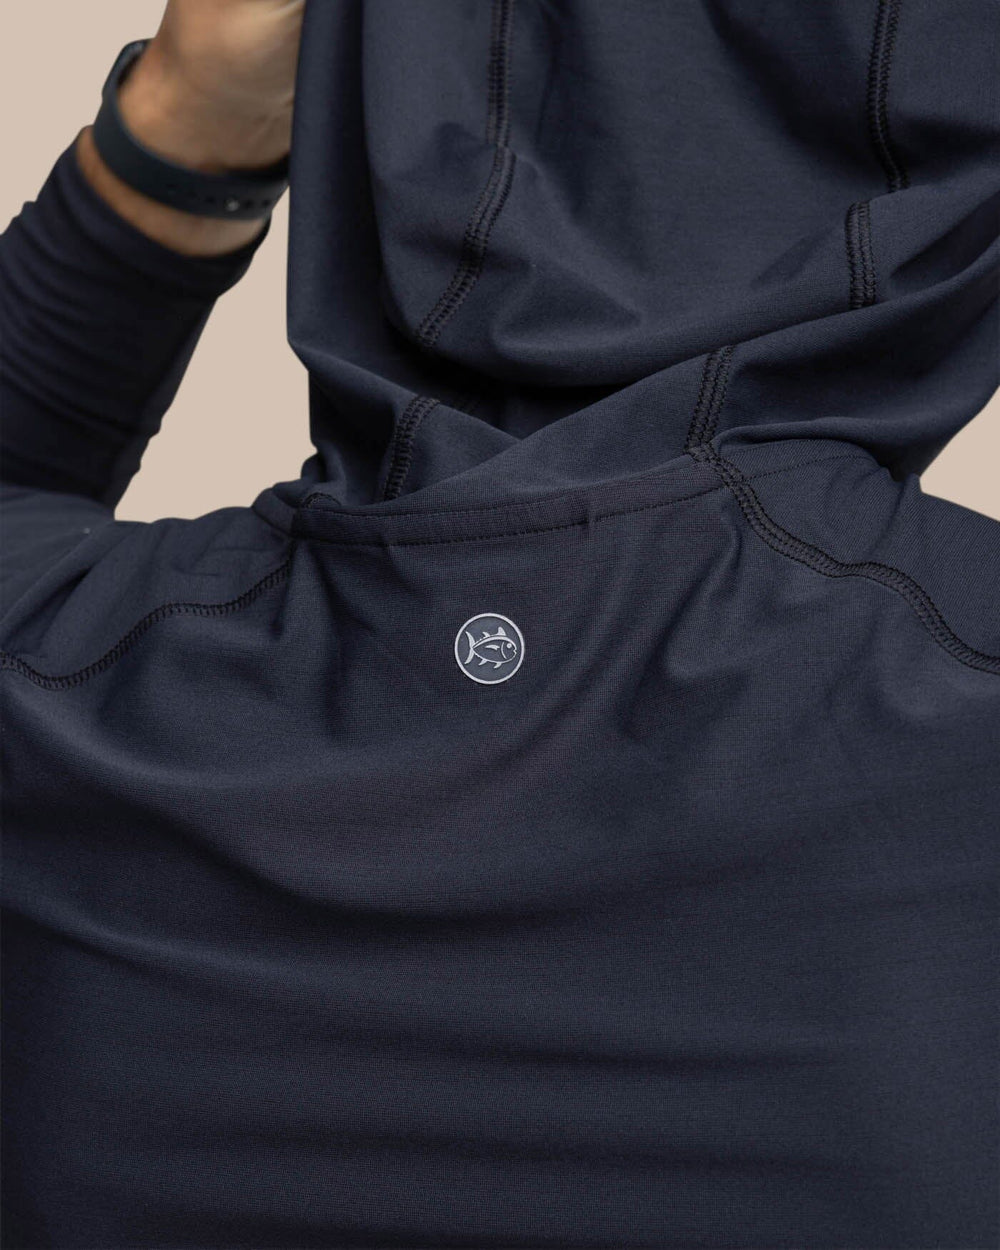 The yoke view of the Southern Tide brrr-illiant Performance Hoodie by Southern Tide - Caviar Black